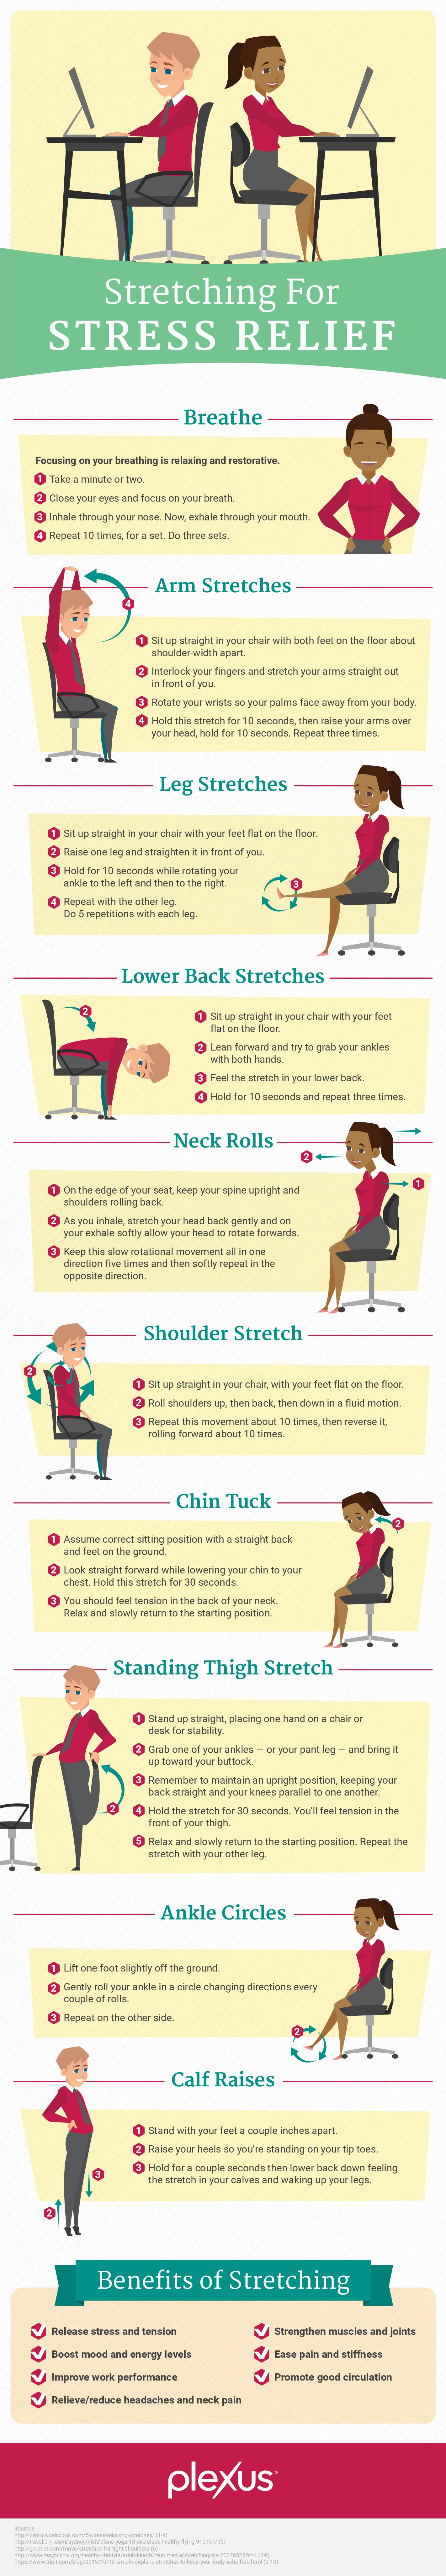 The stress from your day-to-day life can quickly take its toll. Find stress relief with these quick and convenient stretches.